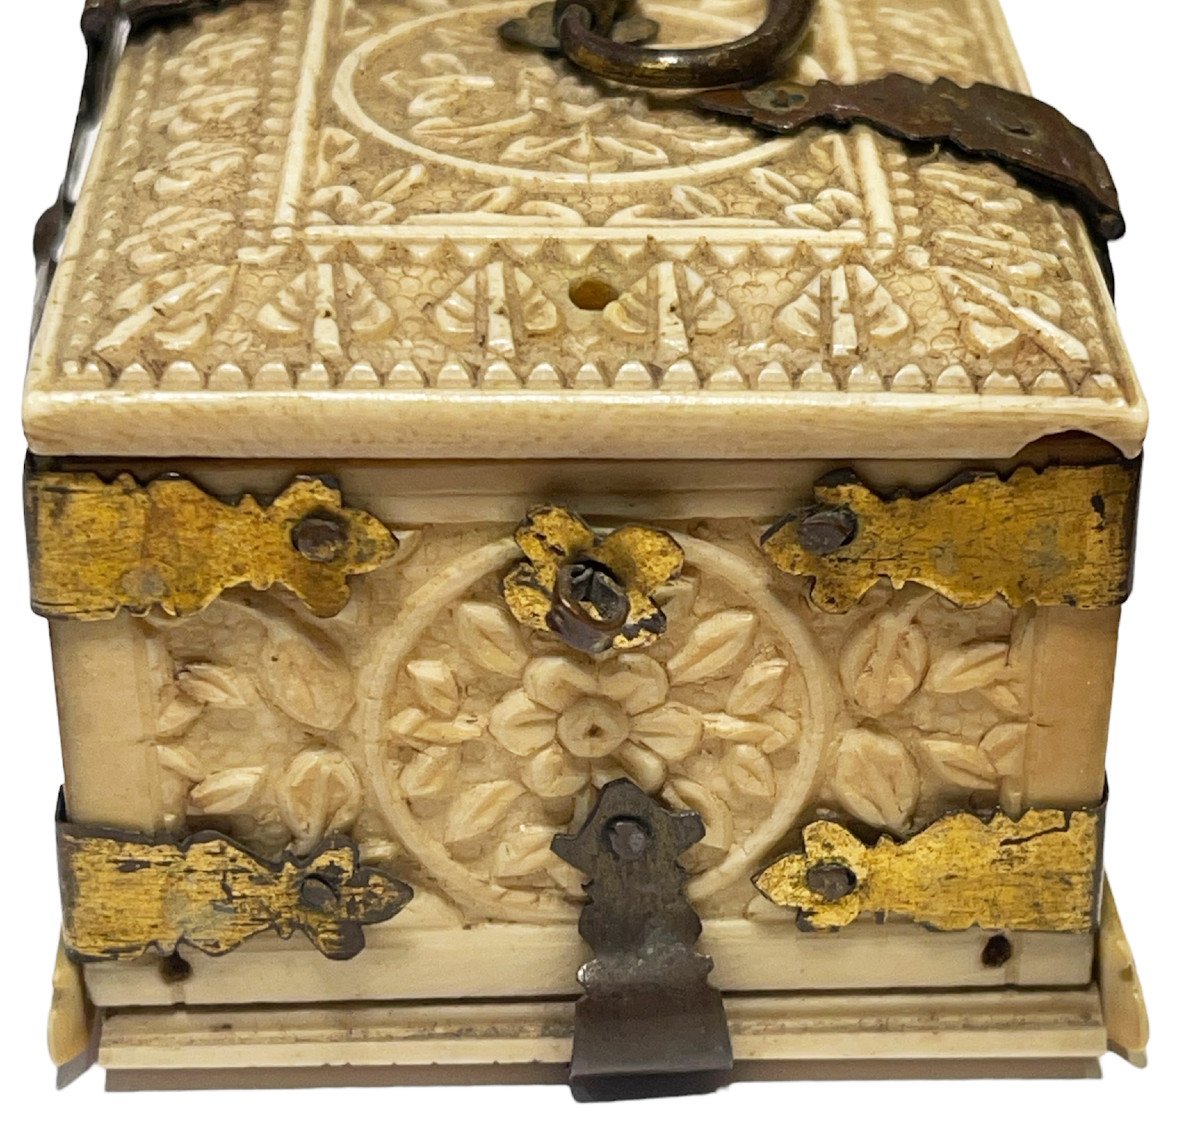 Mughal Ivory Box From The 18th Century-photo-3